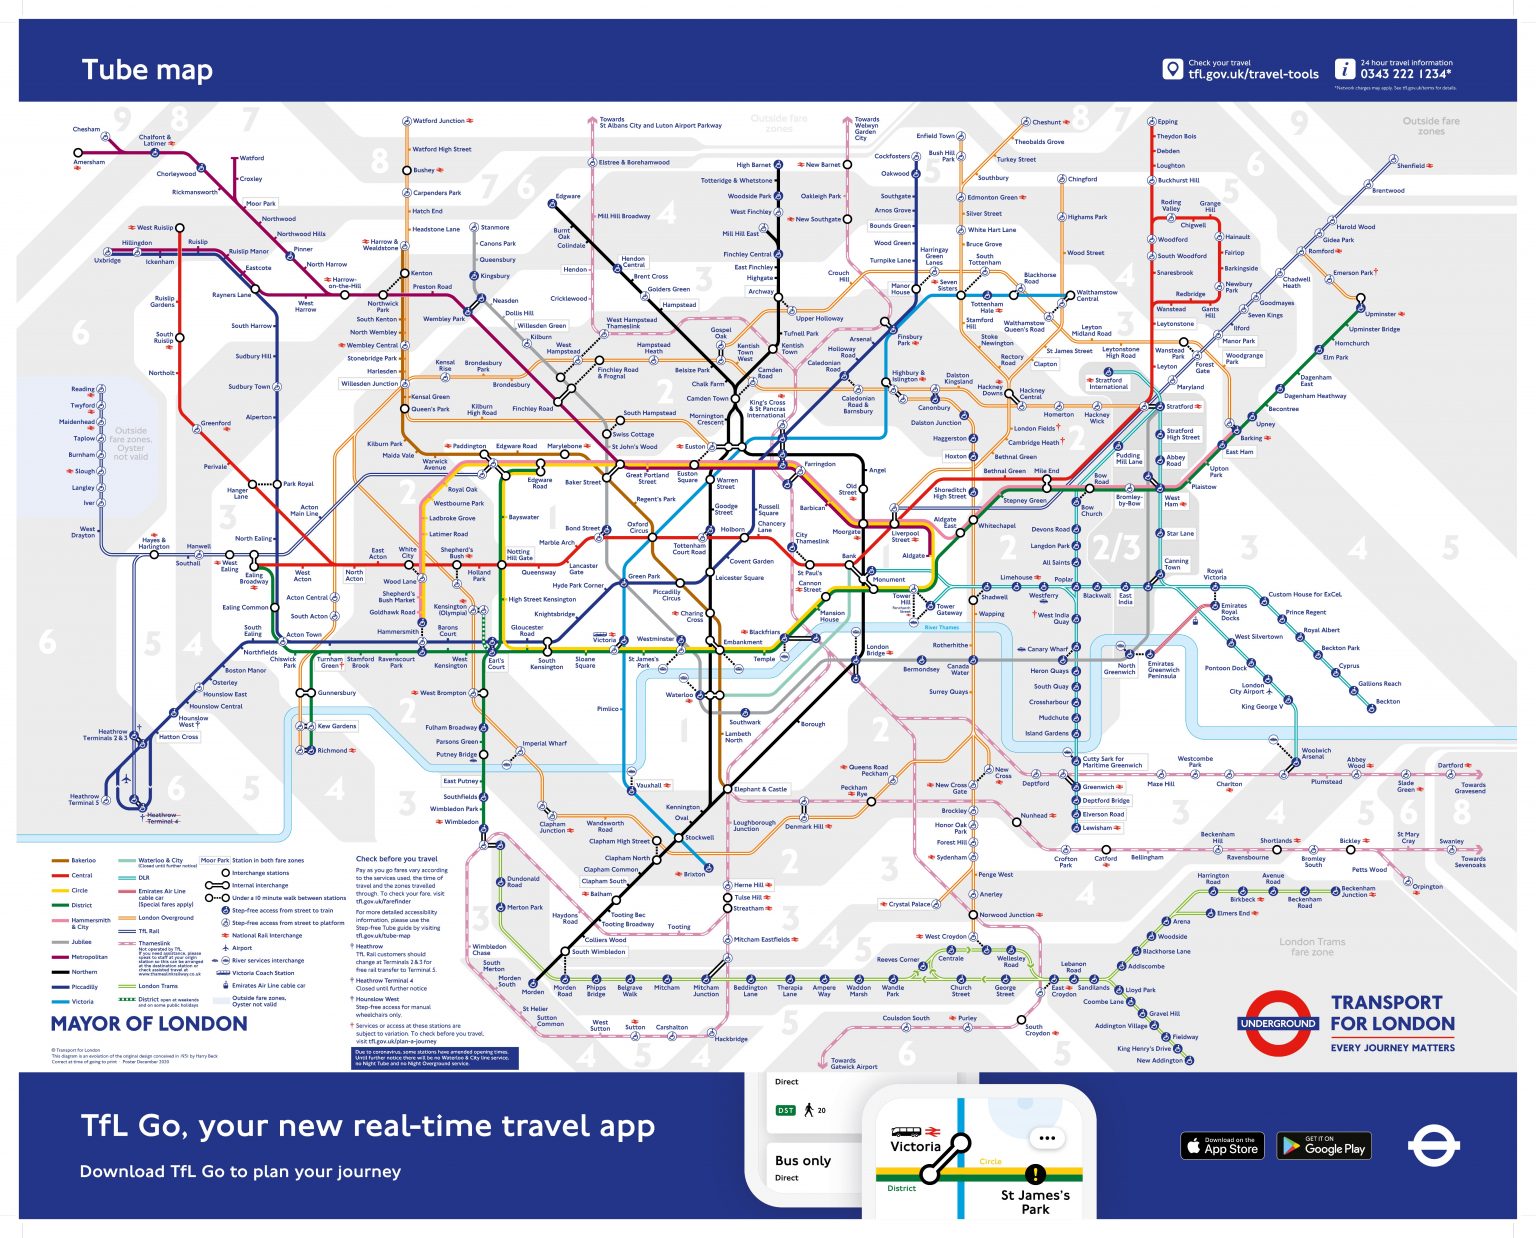 thameslink-to-be-added-to-london-s-tube-map-railstaff